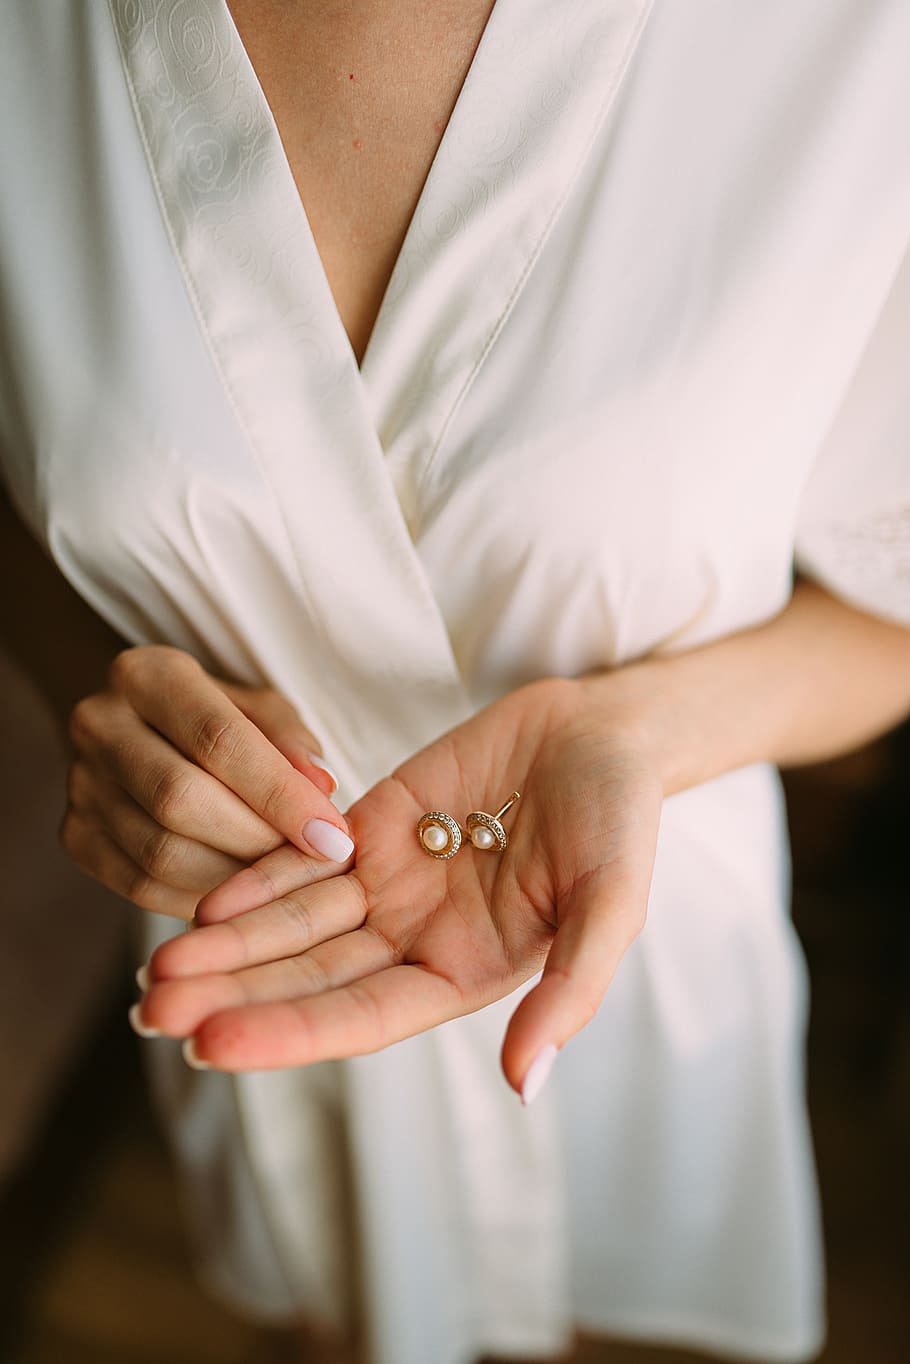 Pair of Gold-colored-and-white Pearl Stud Earrings in Woman's Palm